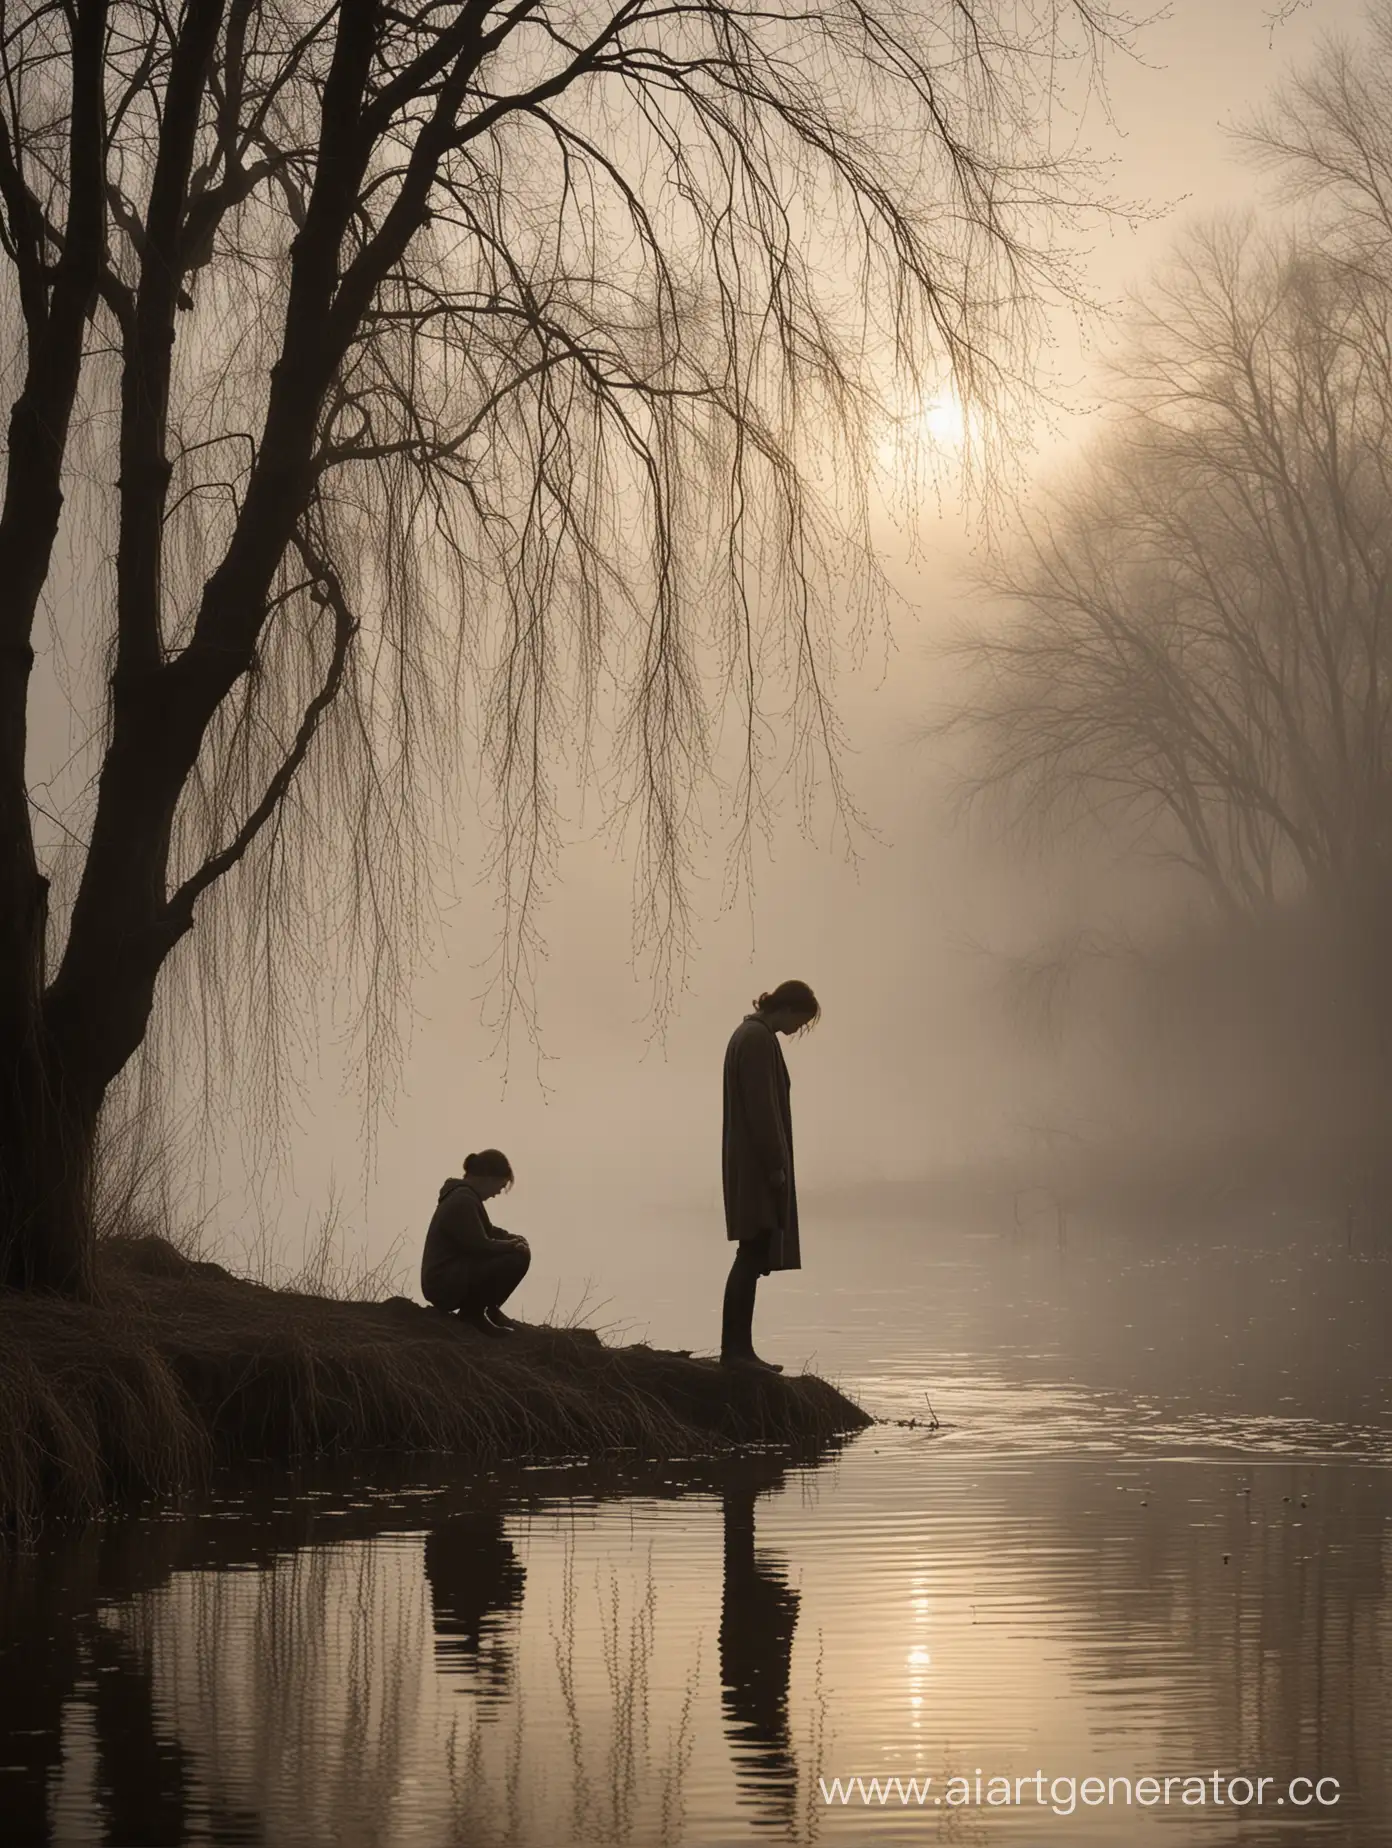 Solitary-Figure-on-Misty-Riverbank-at-Dusk